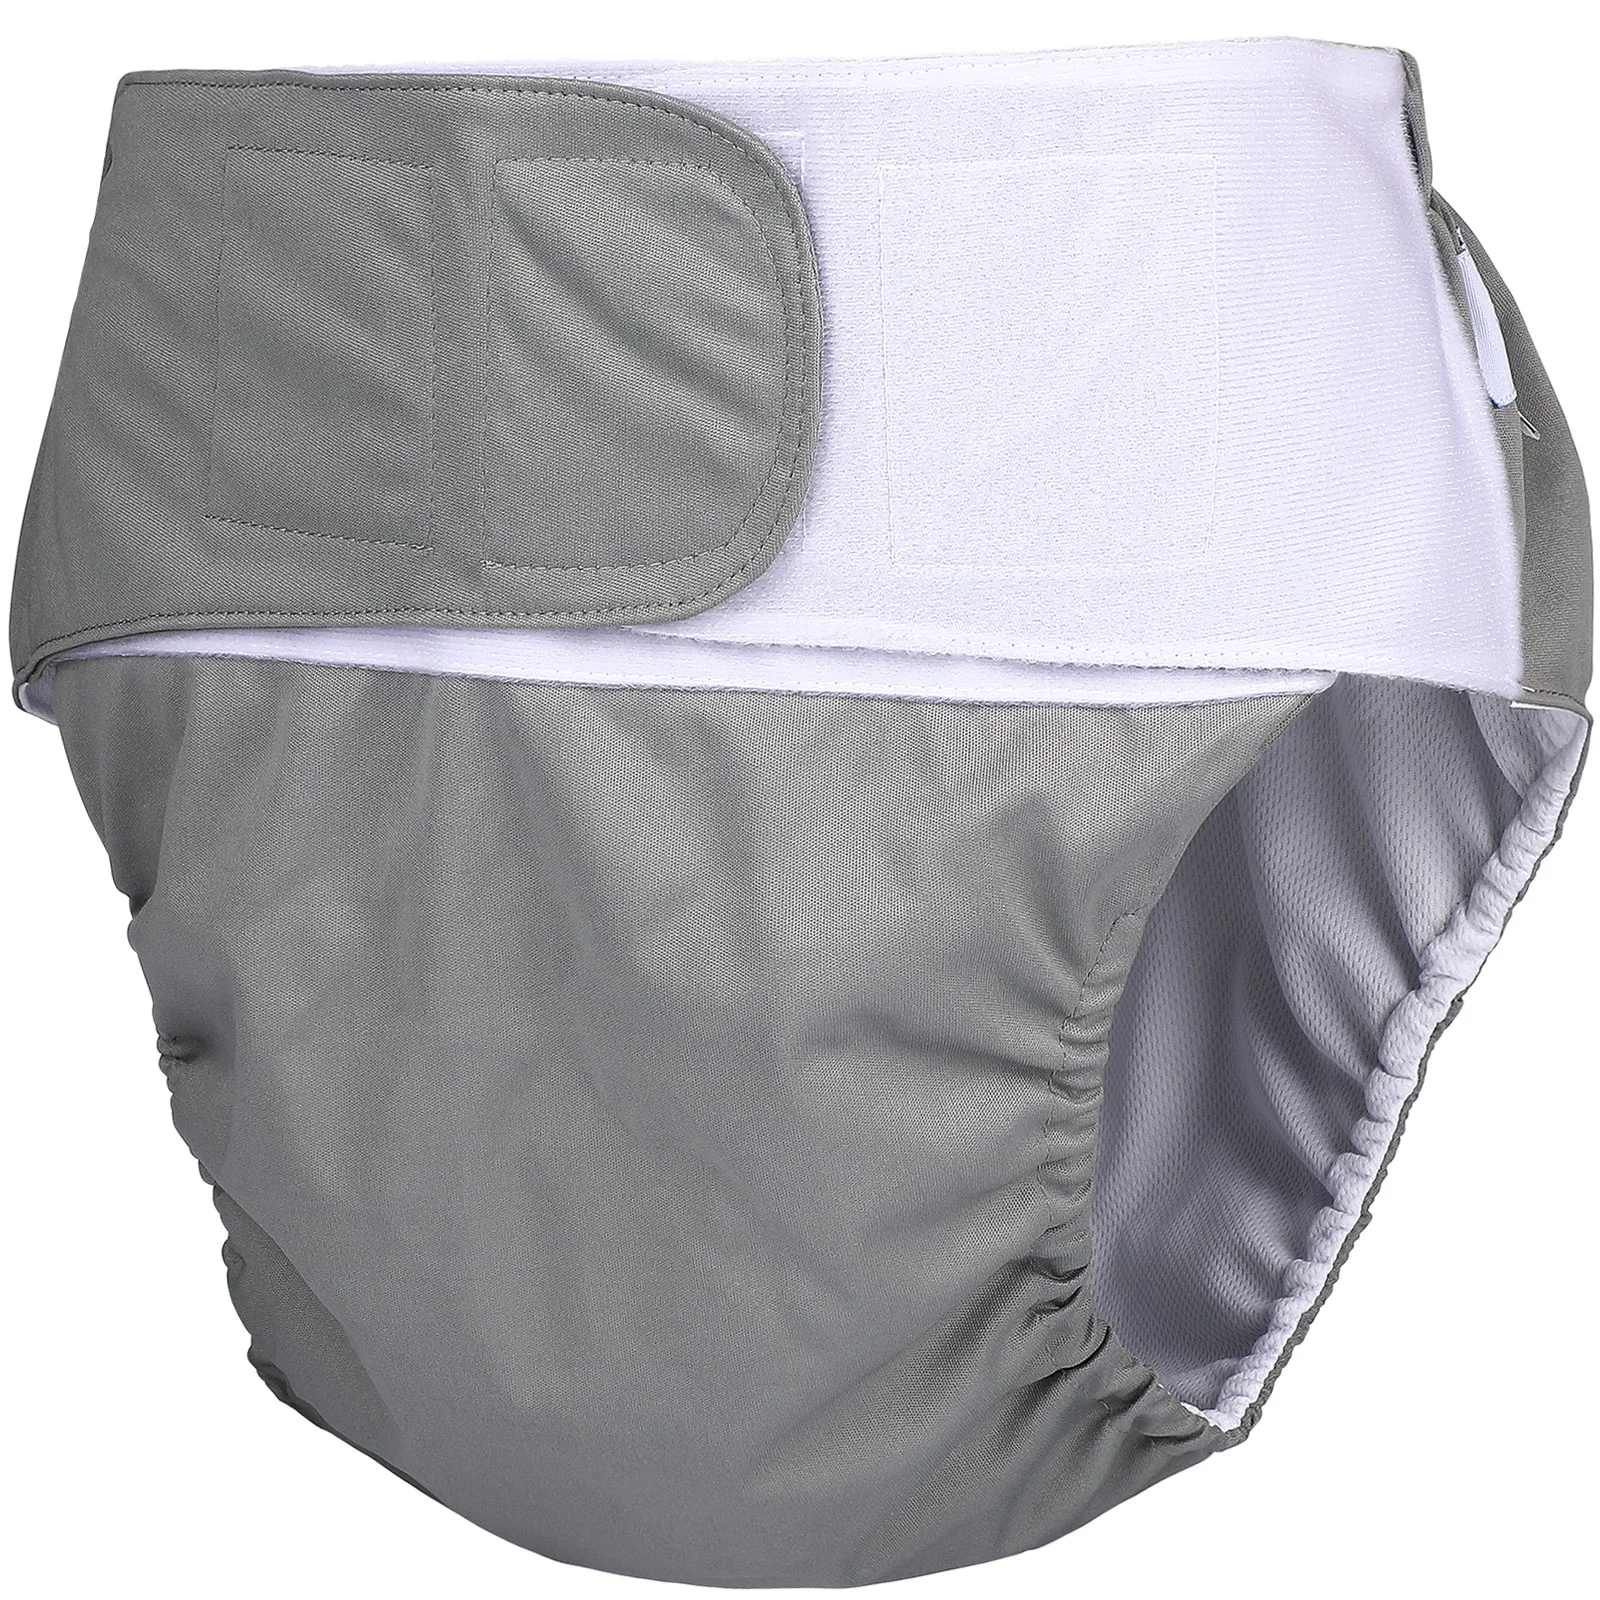 

Adult Diaper Washable Leak-free Reusable Pants Plus Size Adults Diapers Women Clothing Elderly Oversized Nappies